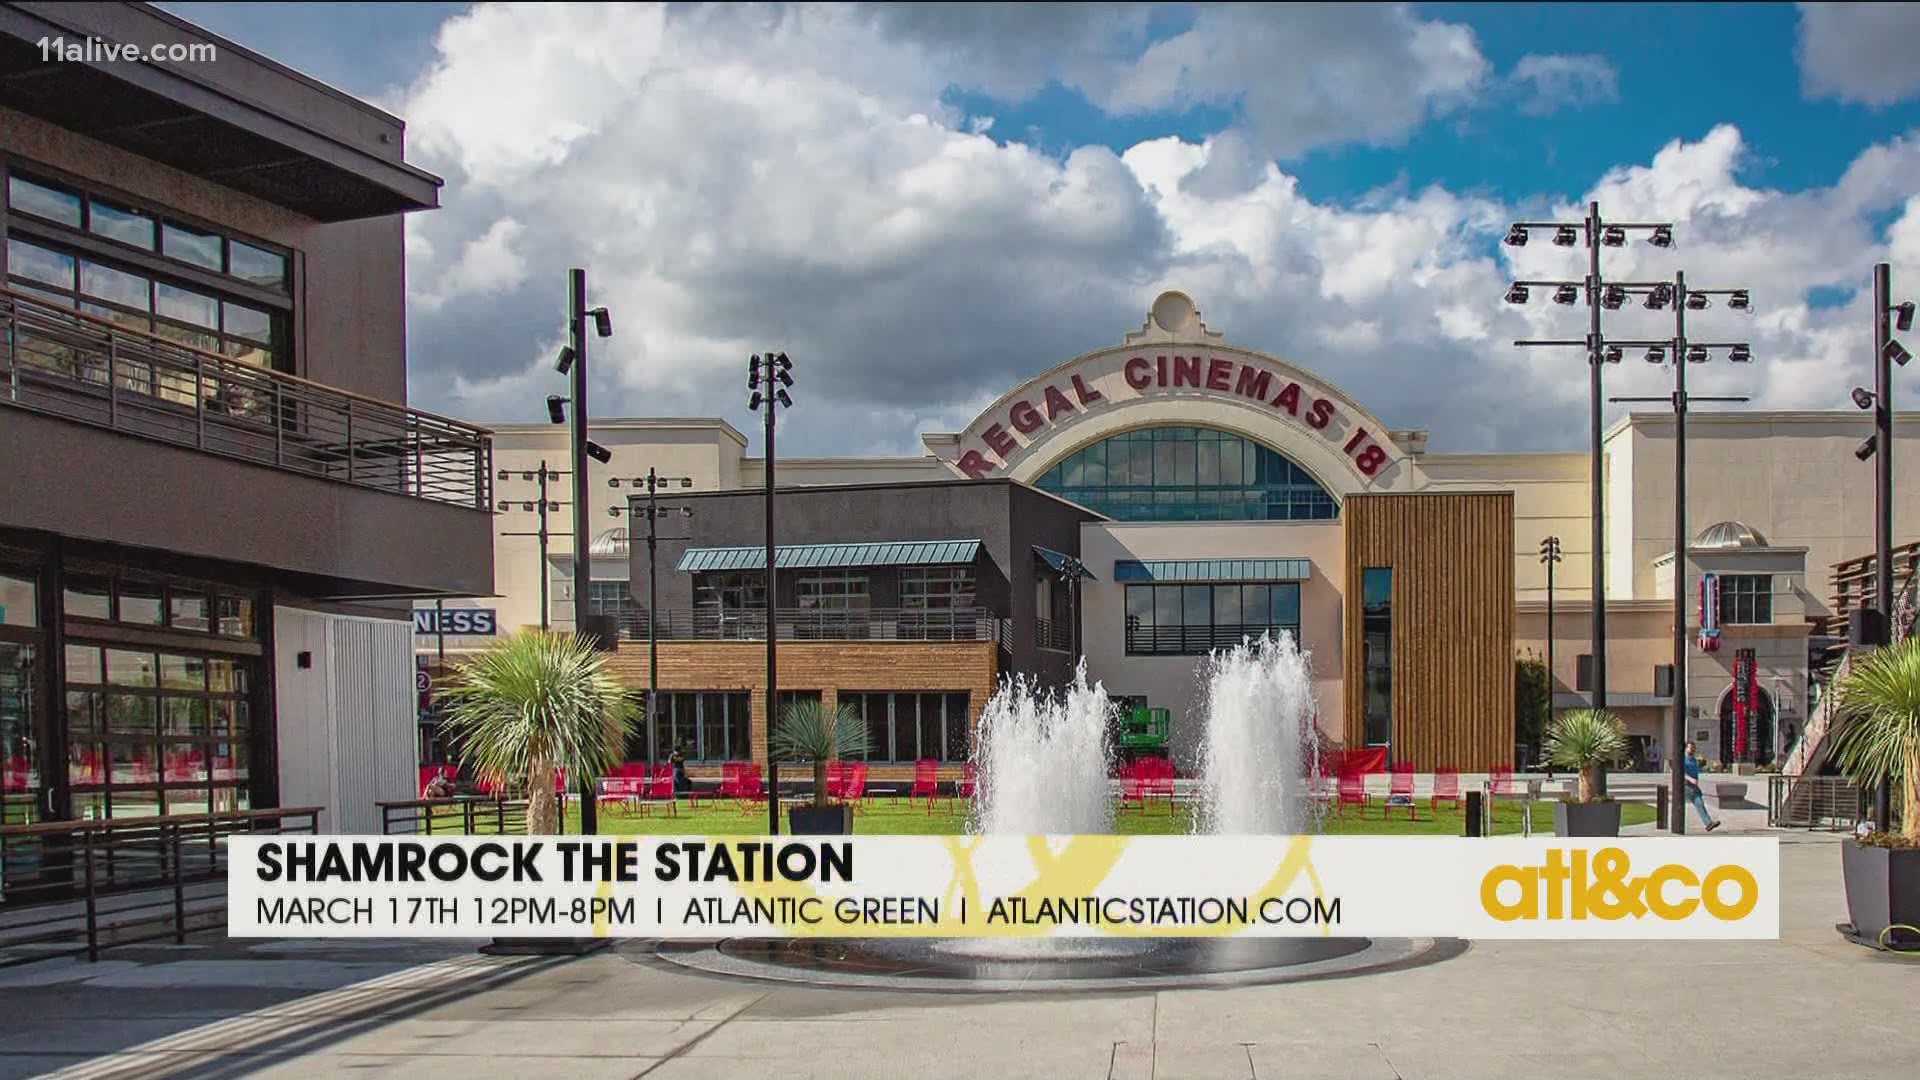 Atlantic Station's Director of Marketing Kristie Ray has the scoop on 'Shamrock the Station' and great new shops and restaurants.